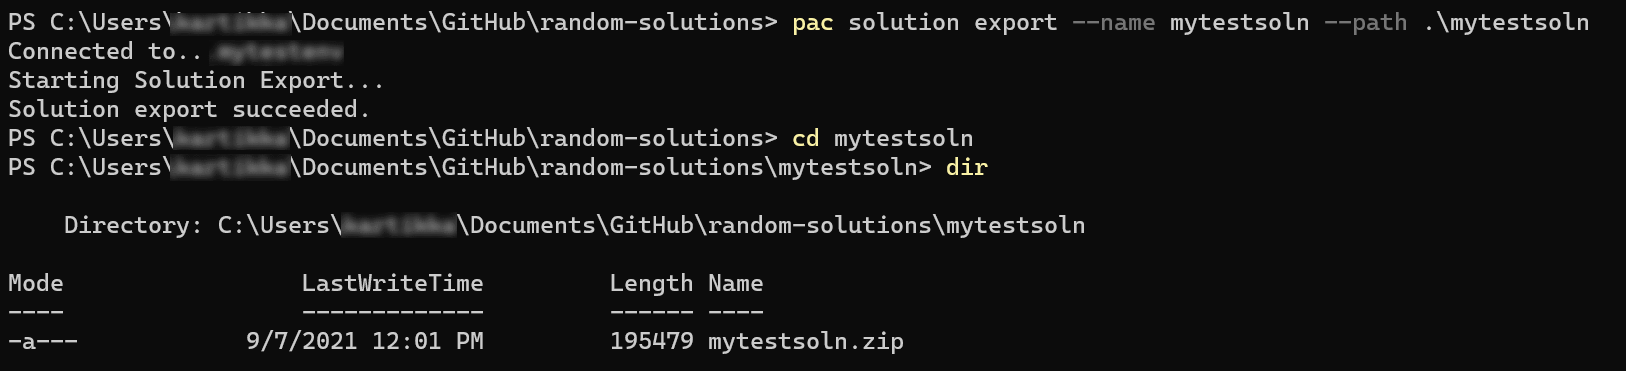 Pac solution export.